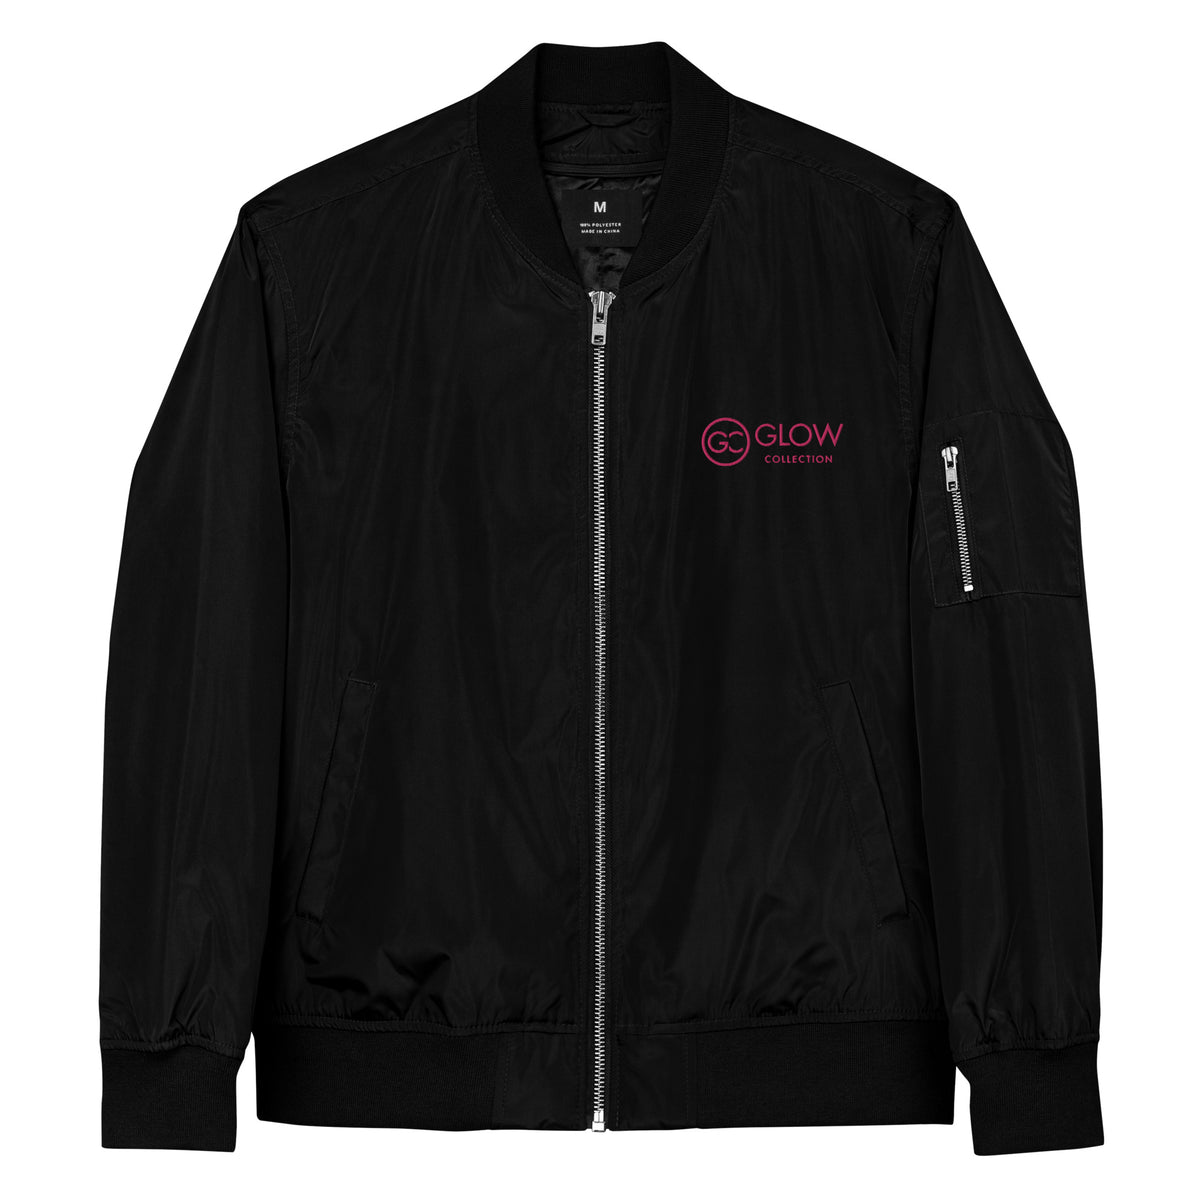 Glow Collection Premium recycled bomber jacket